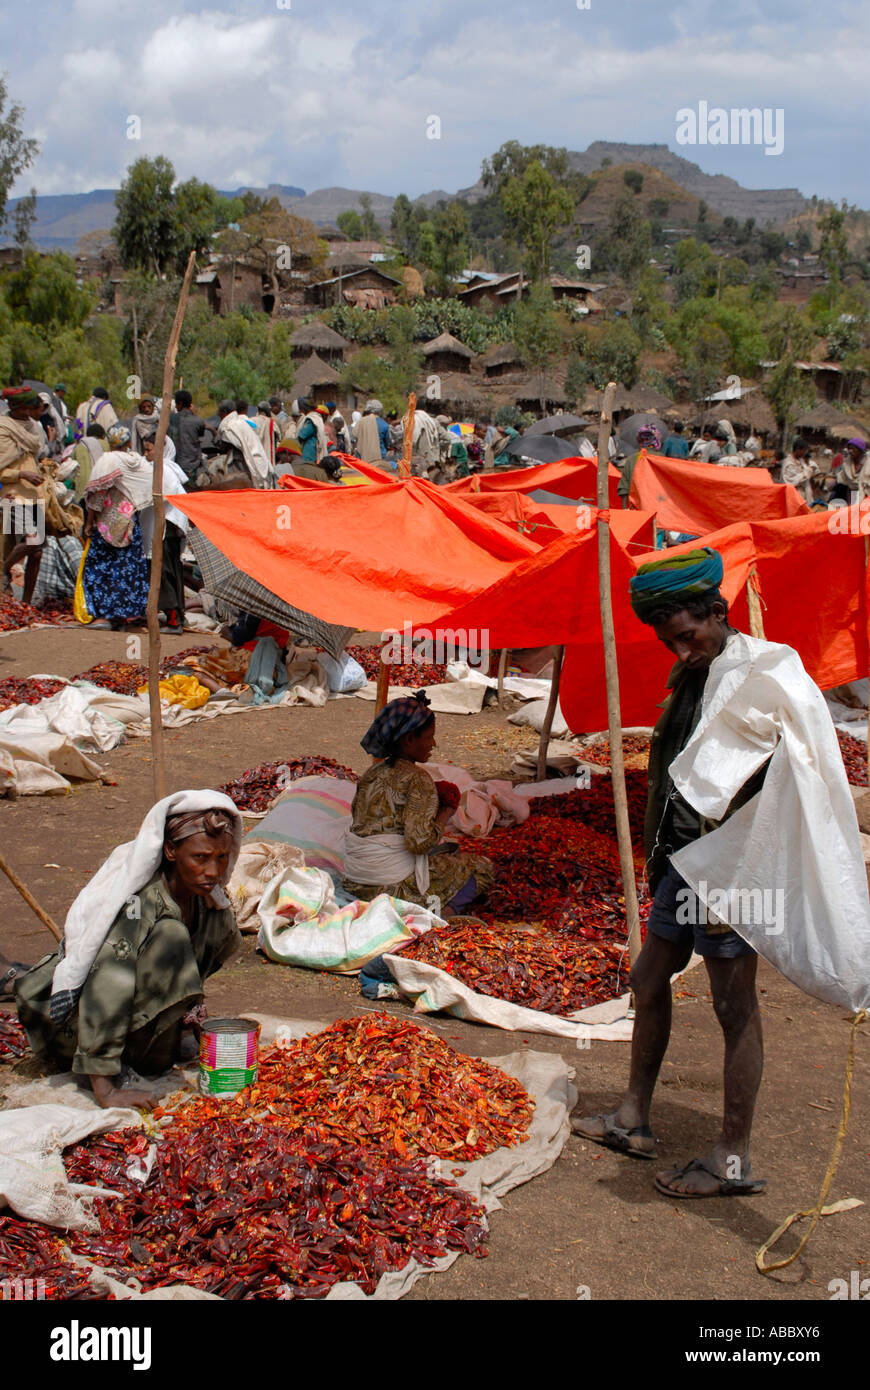 Open sale of red hot chili peppers on the market Lalibela Ethiopia Stock  Photo - Alamy